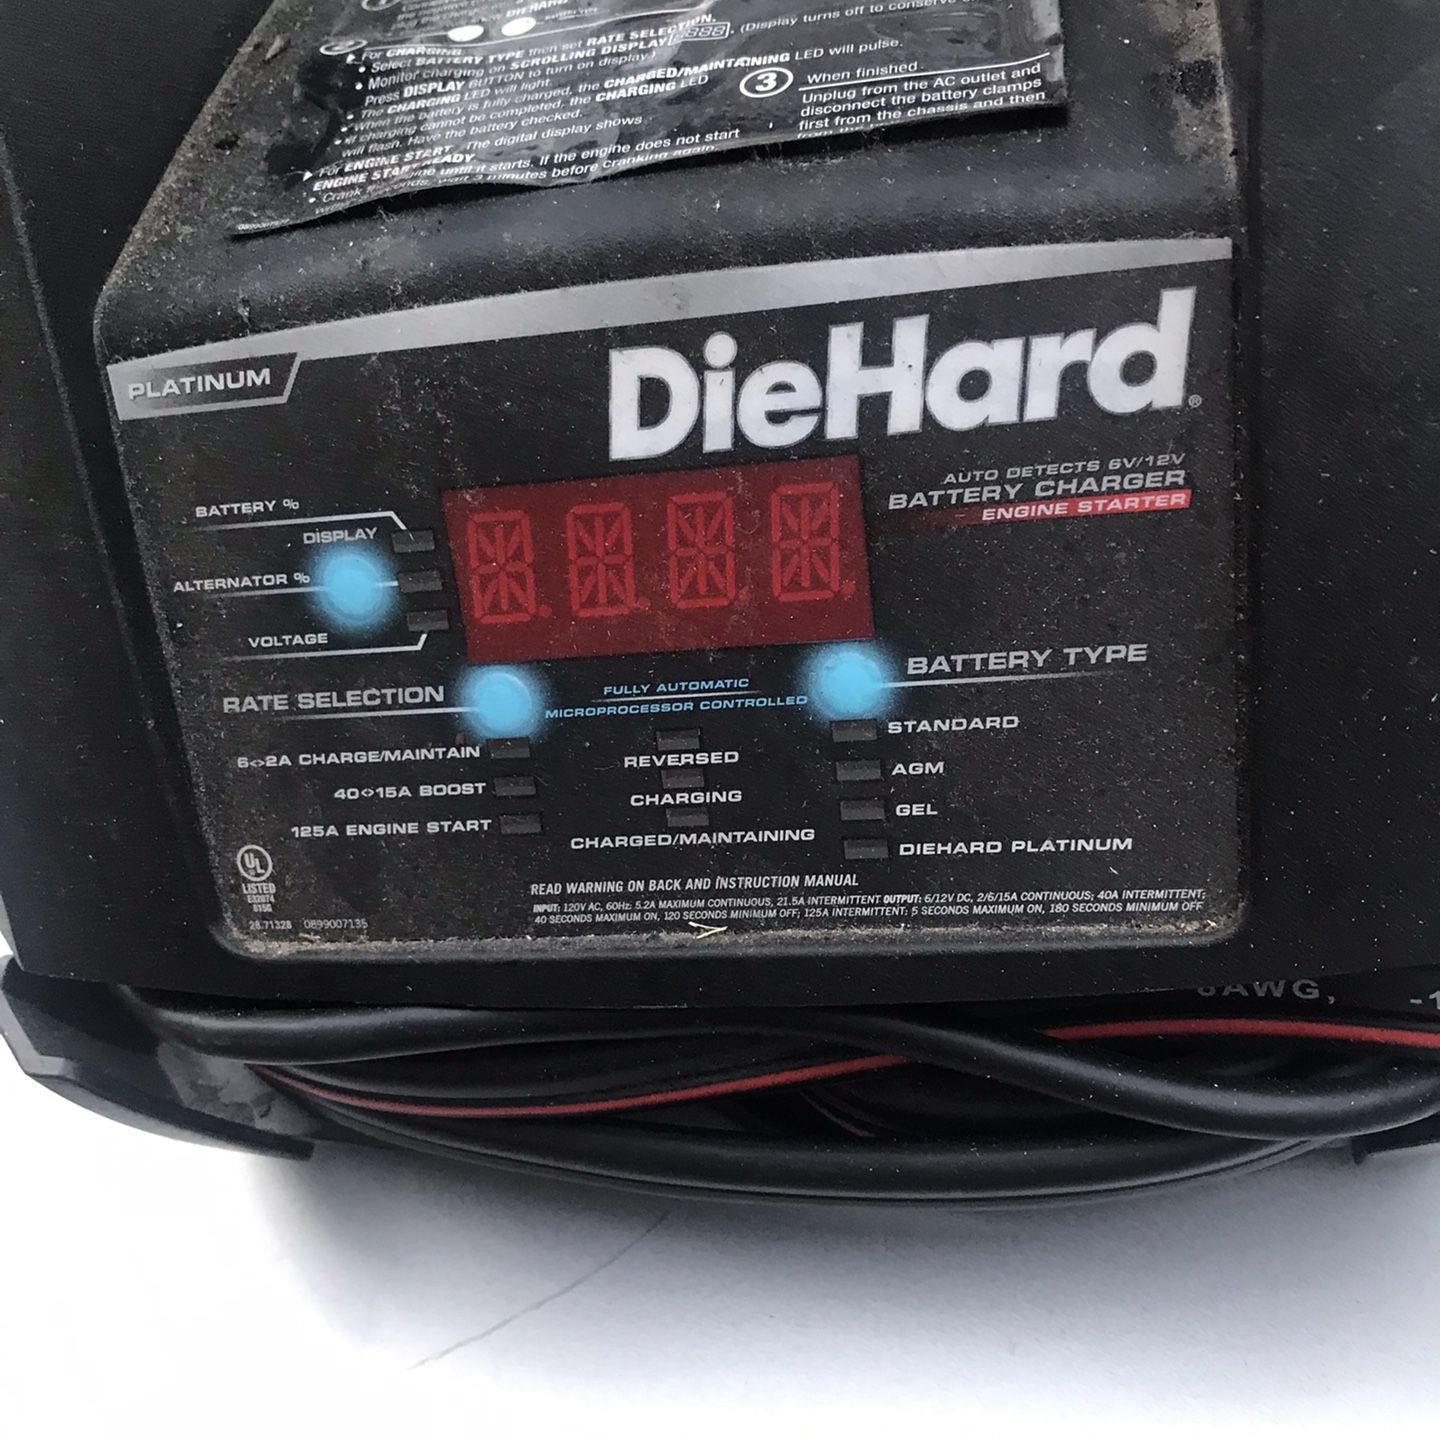 Black & Decker Smart battery charger for Sale in San Jose, CA - OfferUp